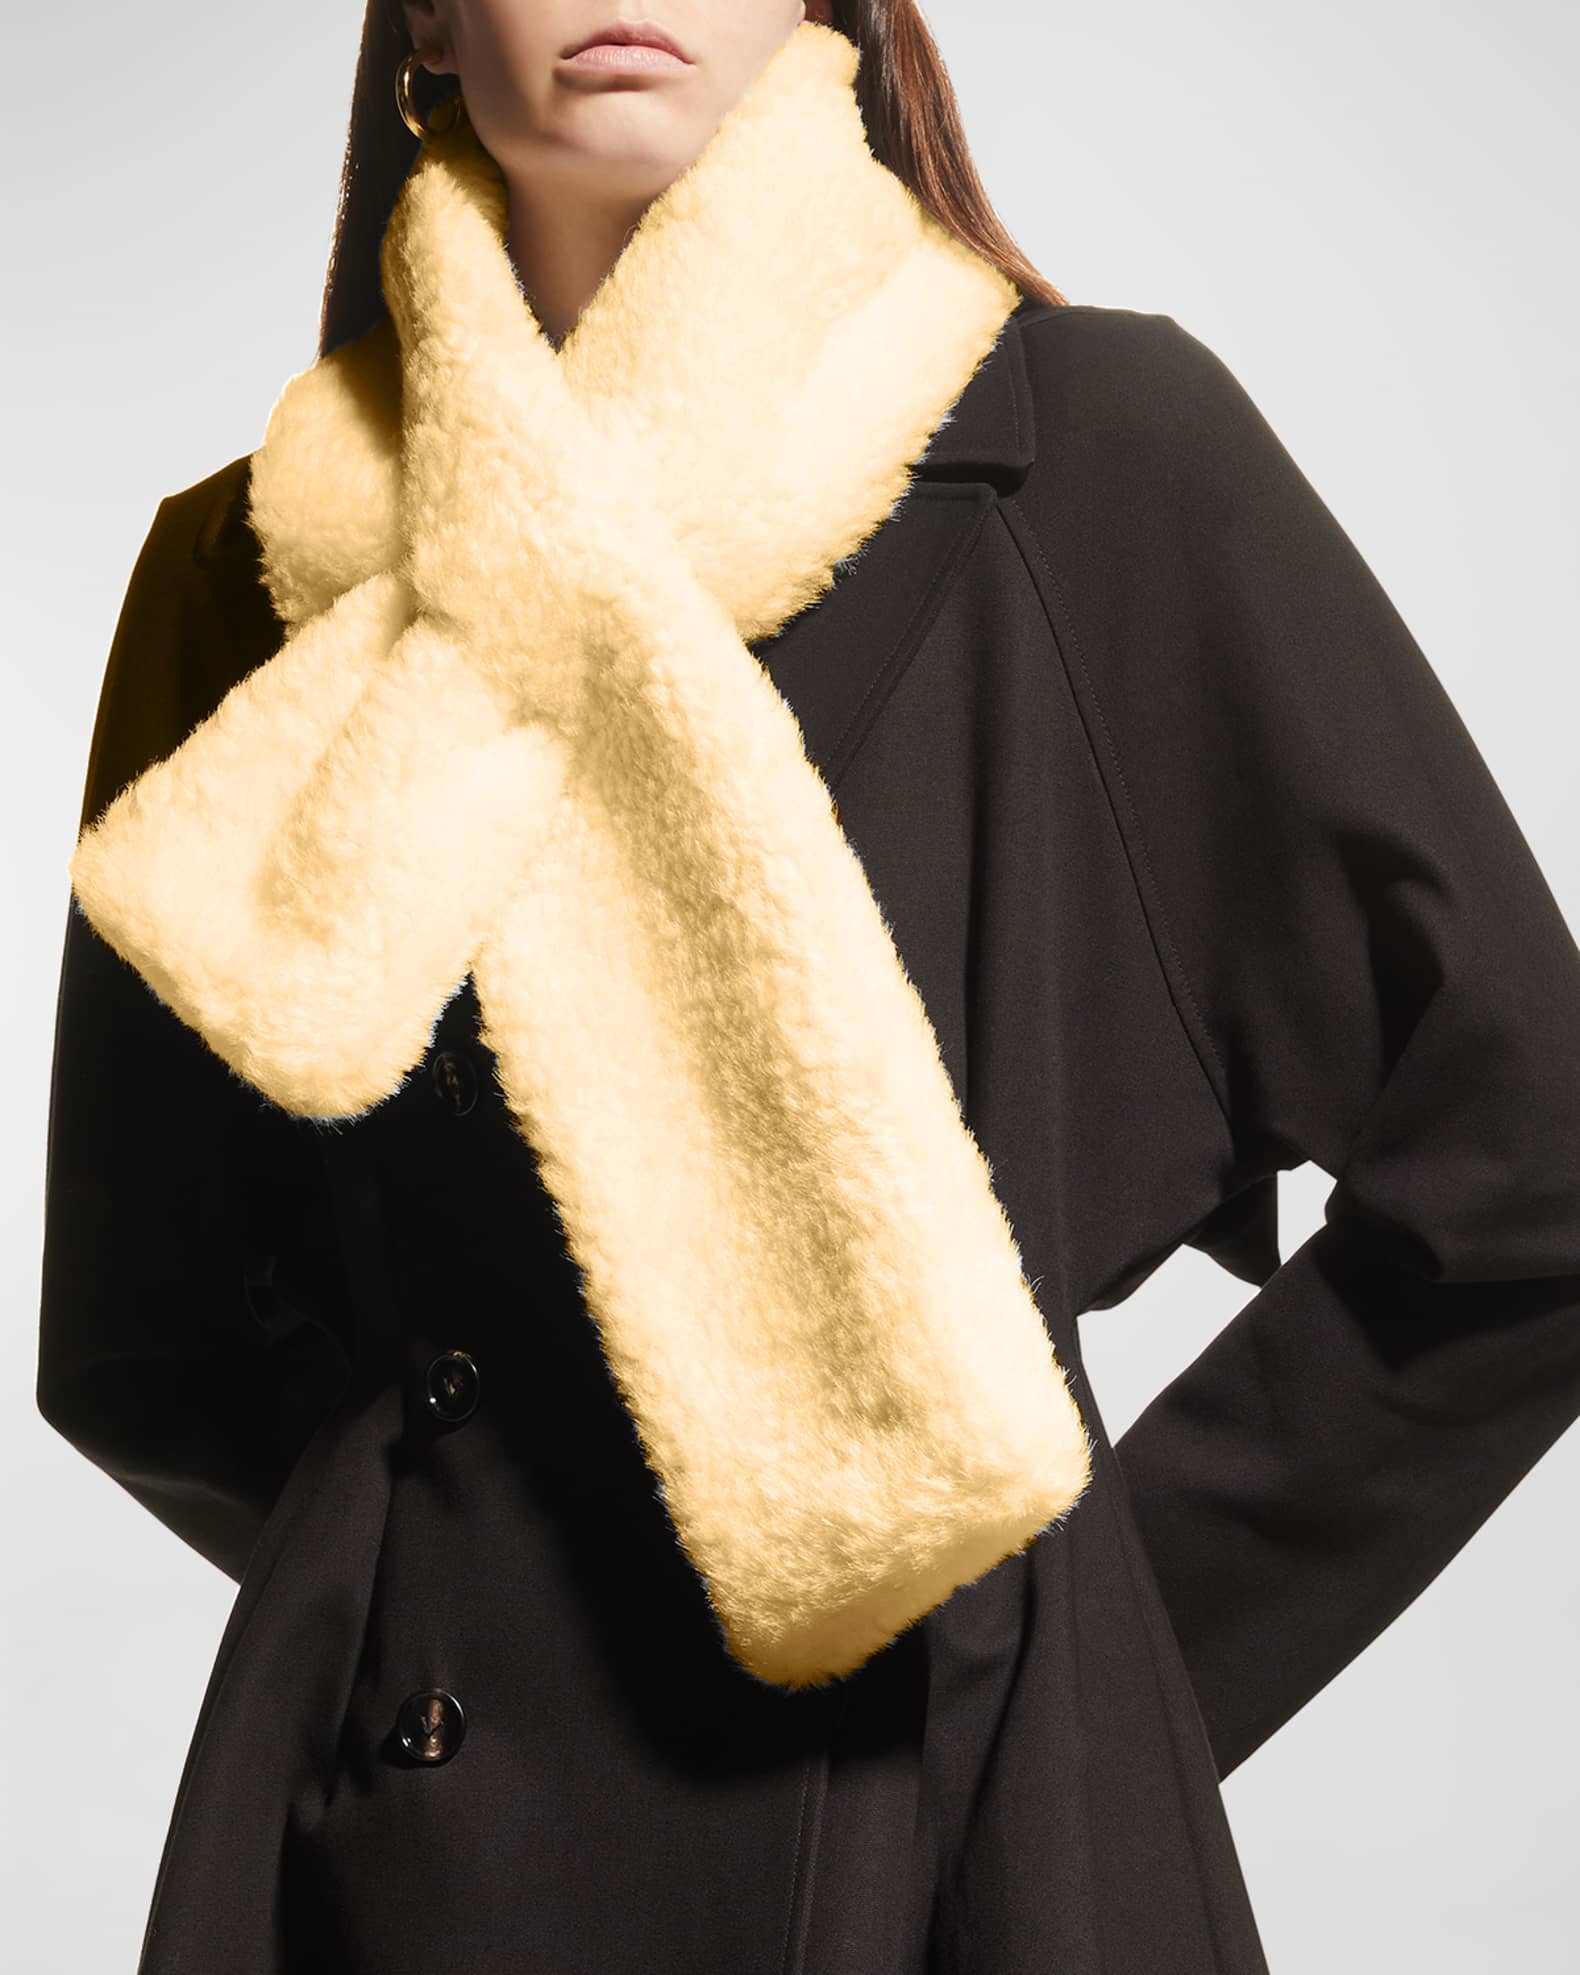 Shop All - Neckwear - Faux and Real Fur Scarves - Page 1 - Surell  Accessories